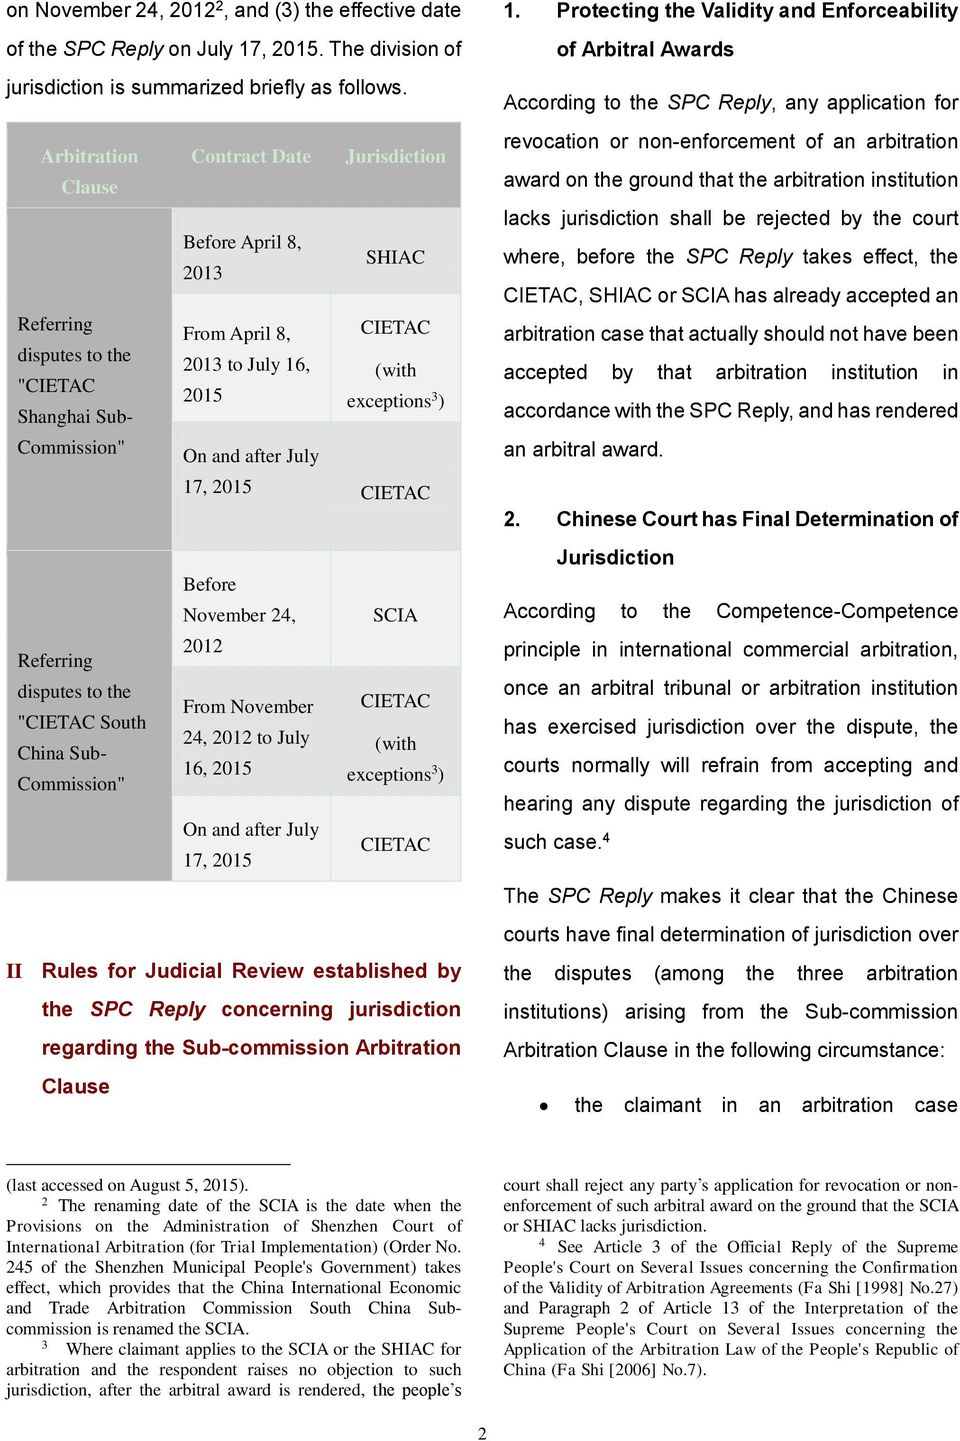 and after July 17, 015 CIETAC Before November 4, SCIA Referring 01 disputes to the From November CIETAC "CIETAC South 4, 01 to July China Sub- (with 16, 015 Commission" exceptions 3 ) On and after